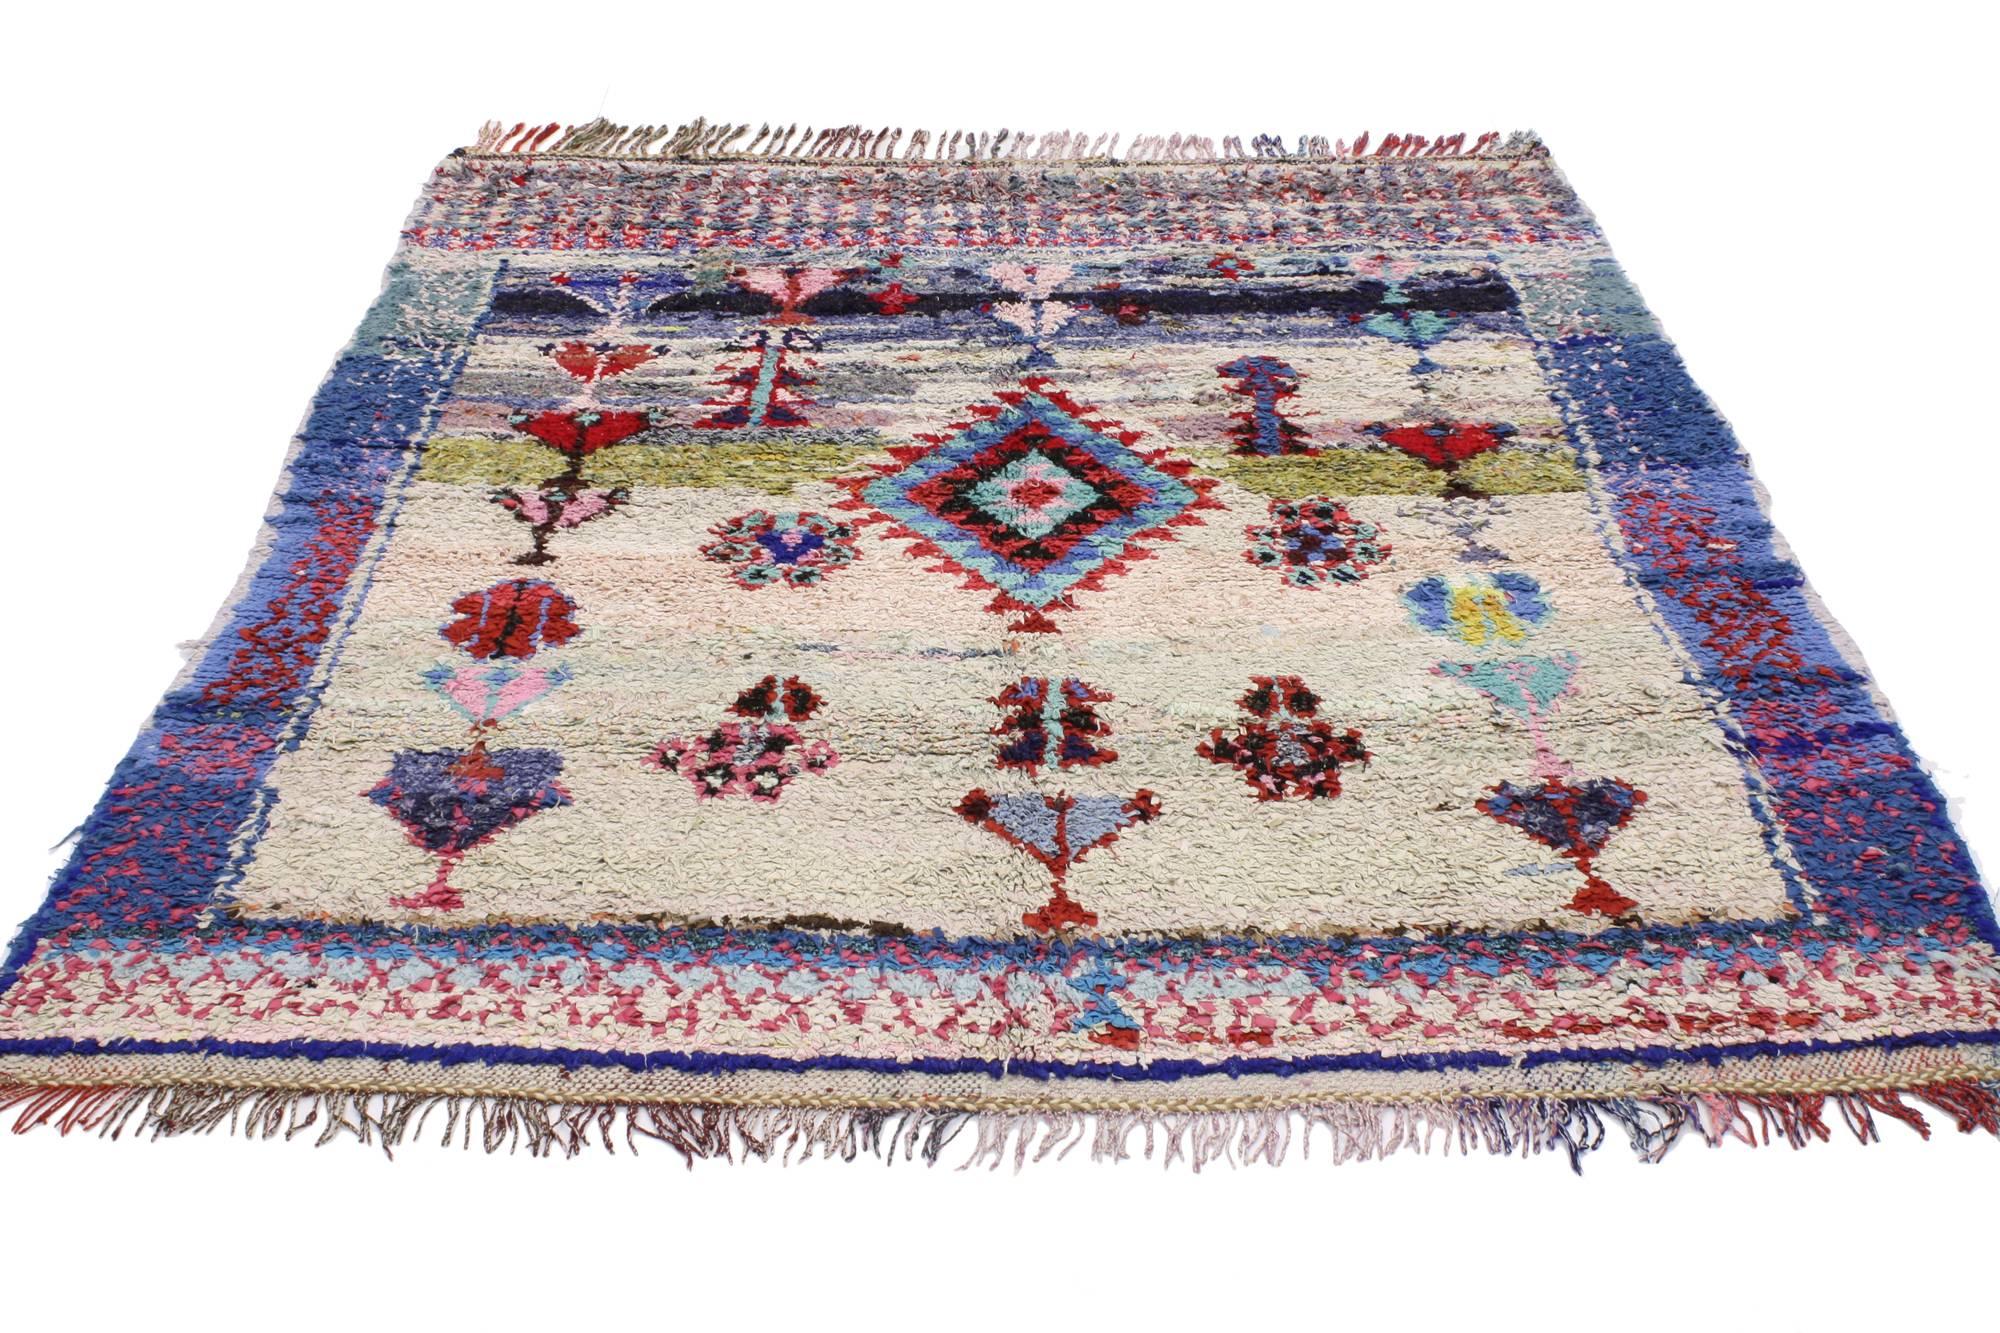 20492 vintage Berber Moroccan Boucherouite rug 04'10 x 05'04. The tribal style and unique hues of this vintage Berber Moroccan Boucherouite rug are a change of pace from the vivacious colors typically associated with Moroccan culture, creating a